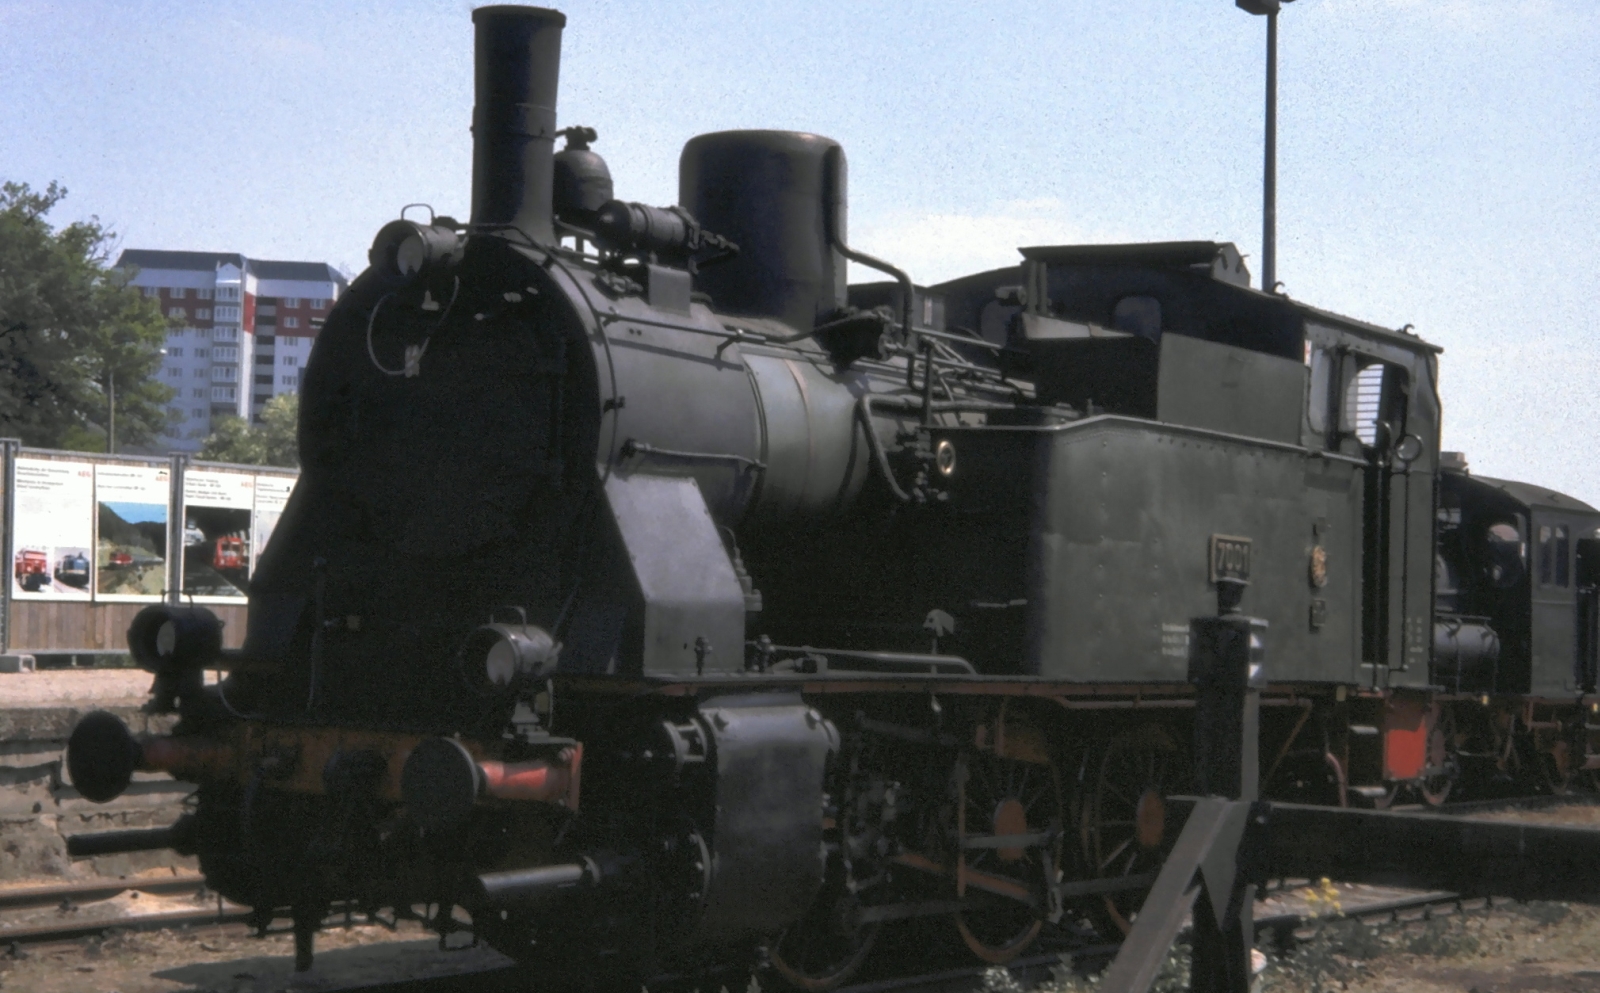 Former number 7001 in May 1993 in Potsdam